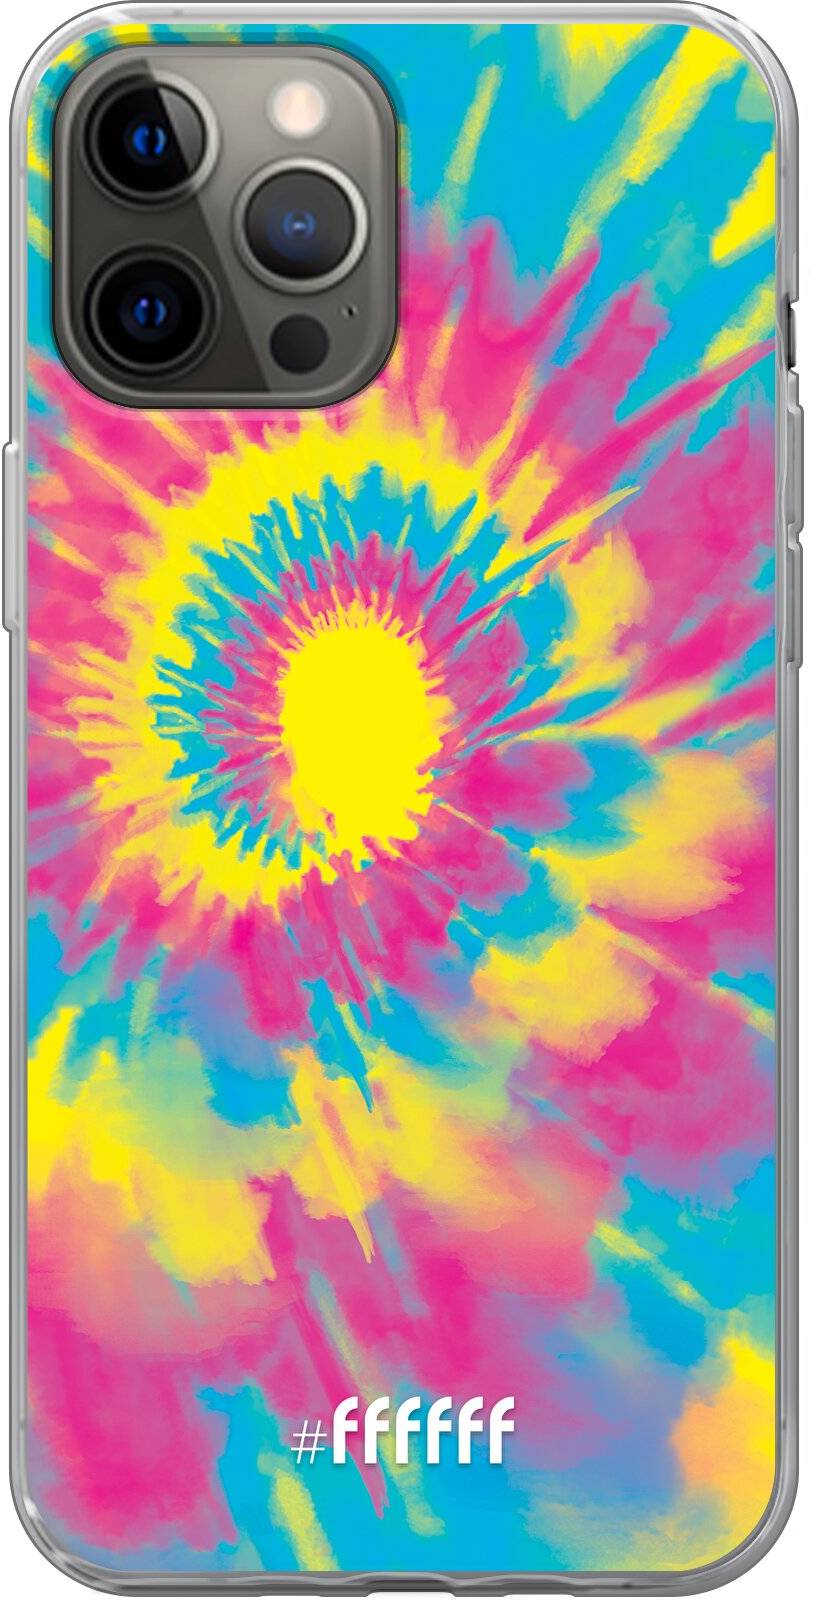 Psychedelic Tie Dye iPhone 12 Pro Max